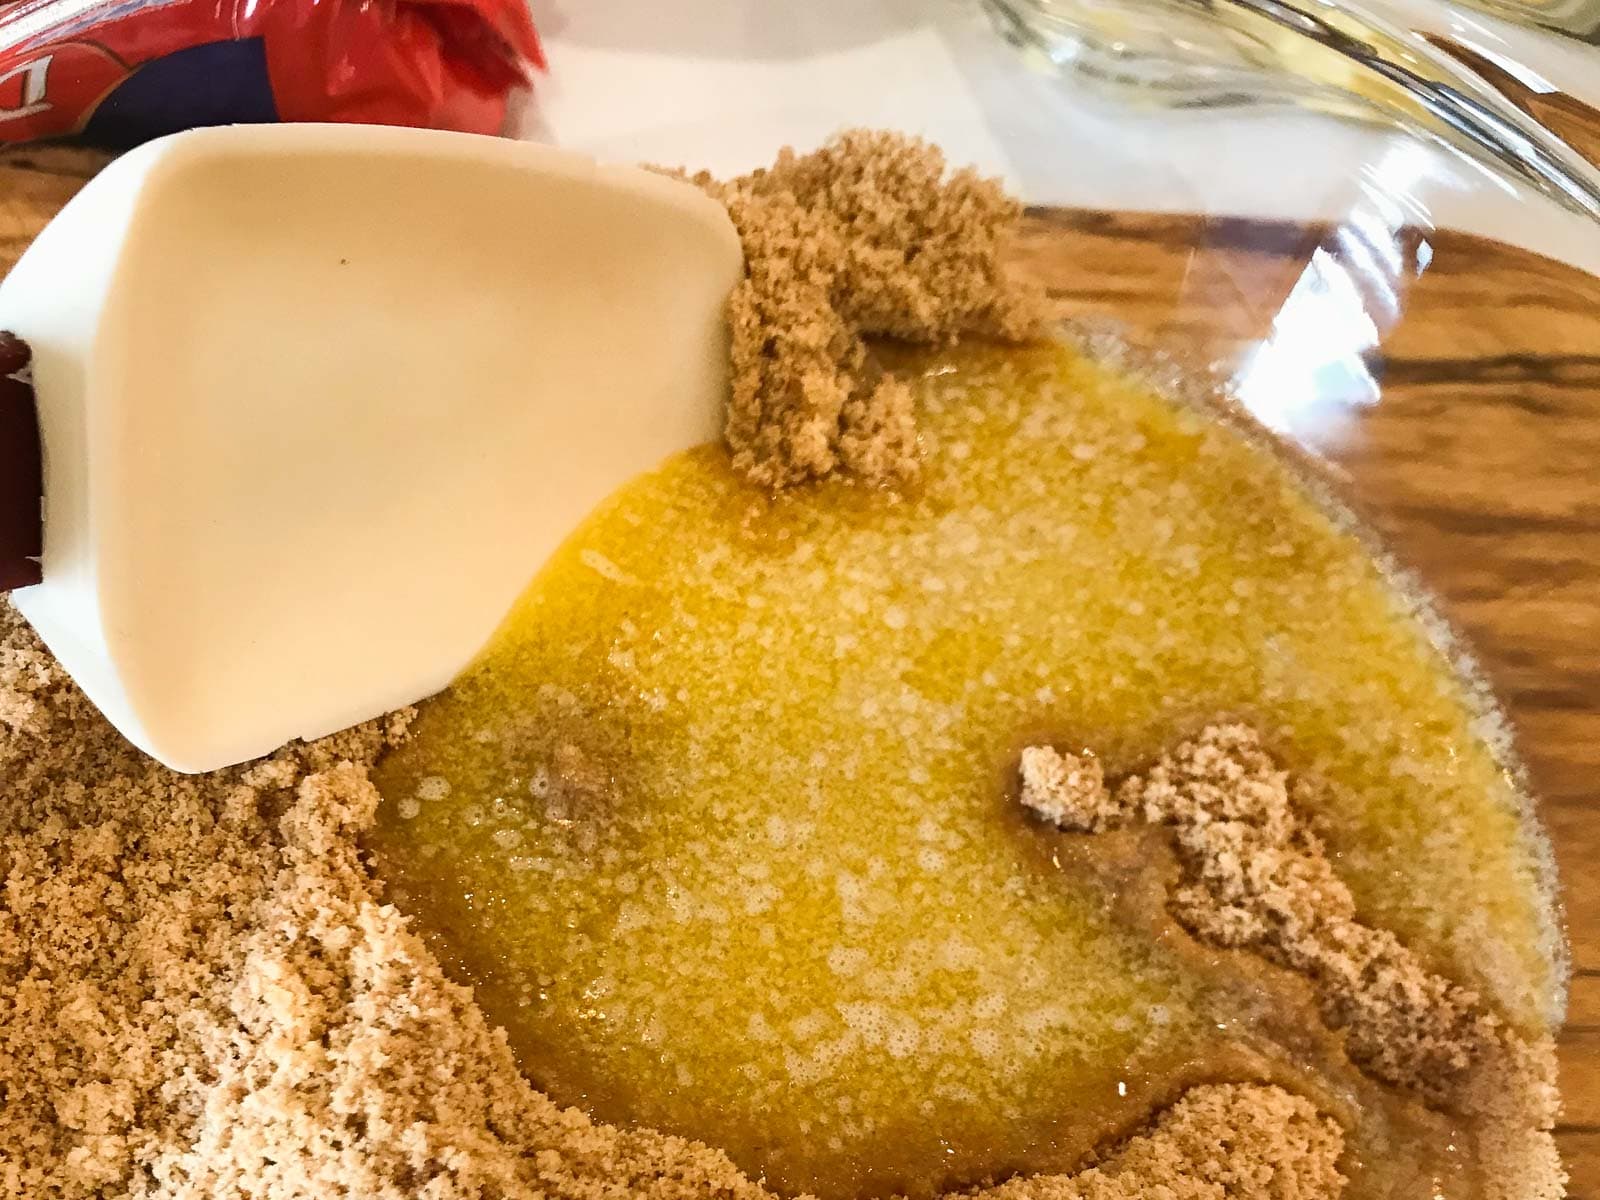 Crushed digestive biscuits with added melted butter in a glass bowl.